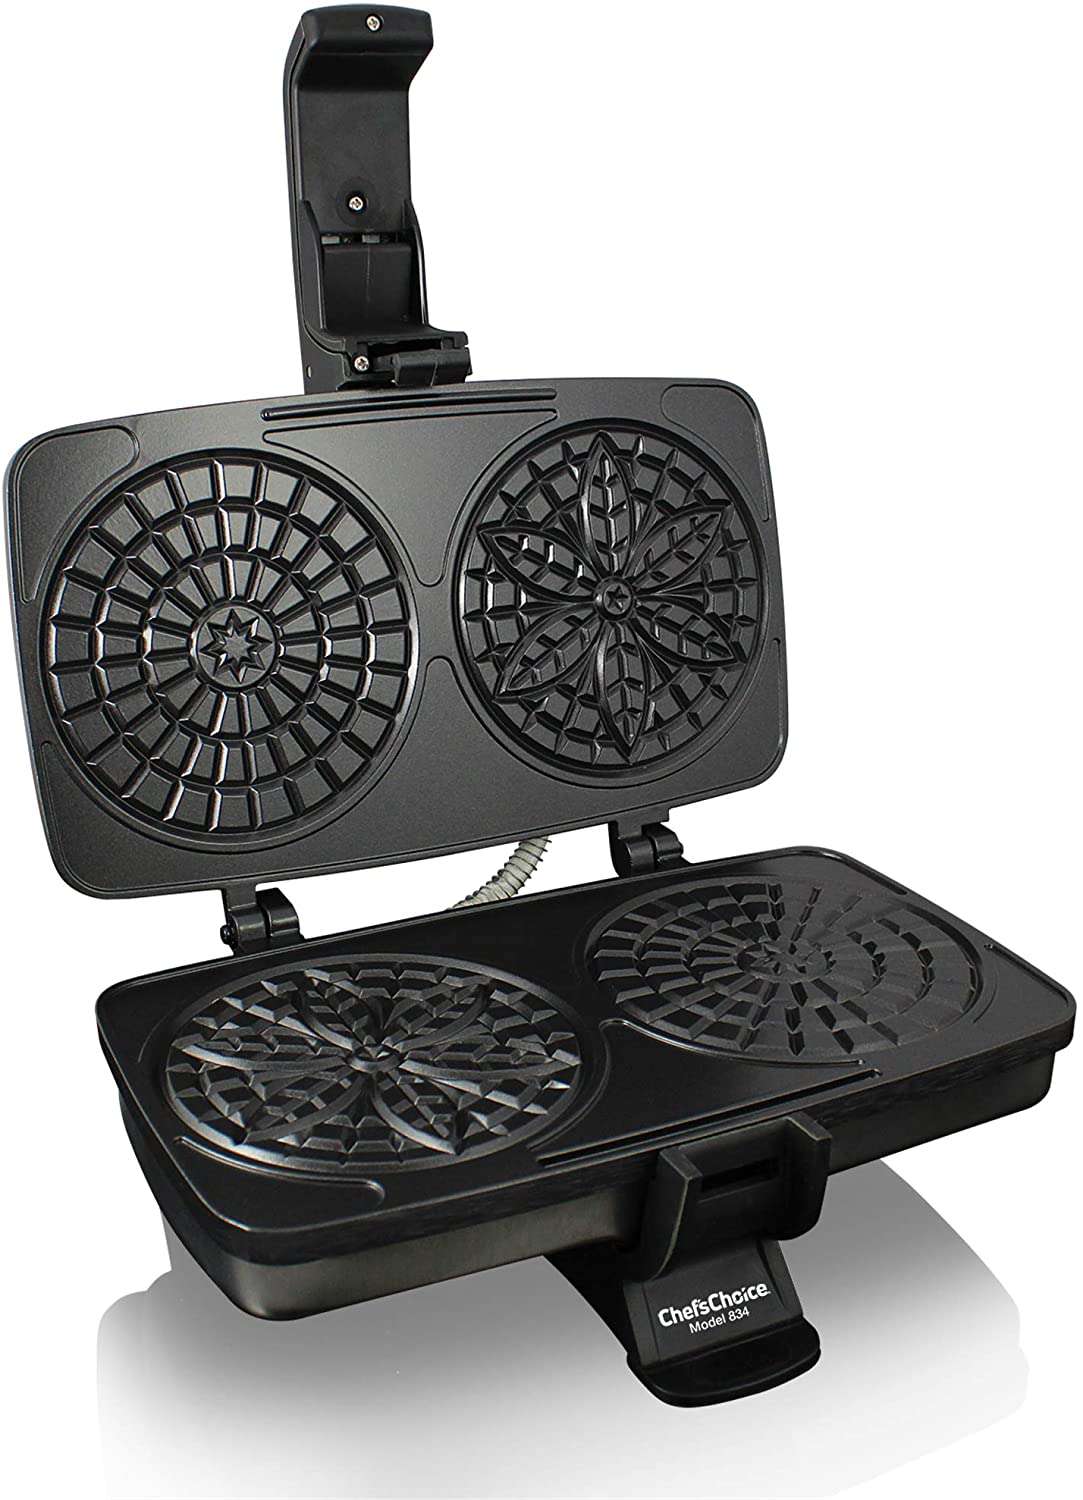 pizzelle maker with black nonstick surface